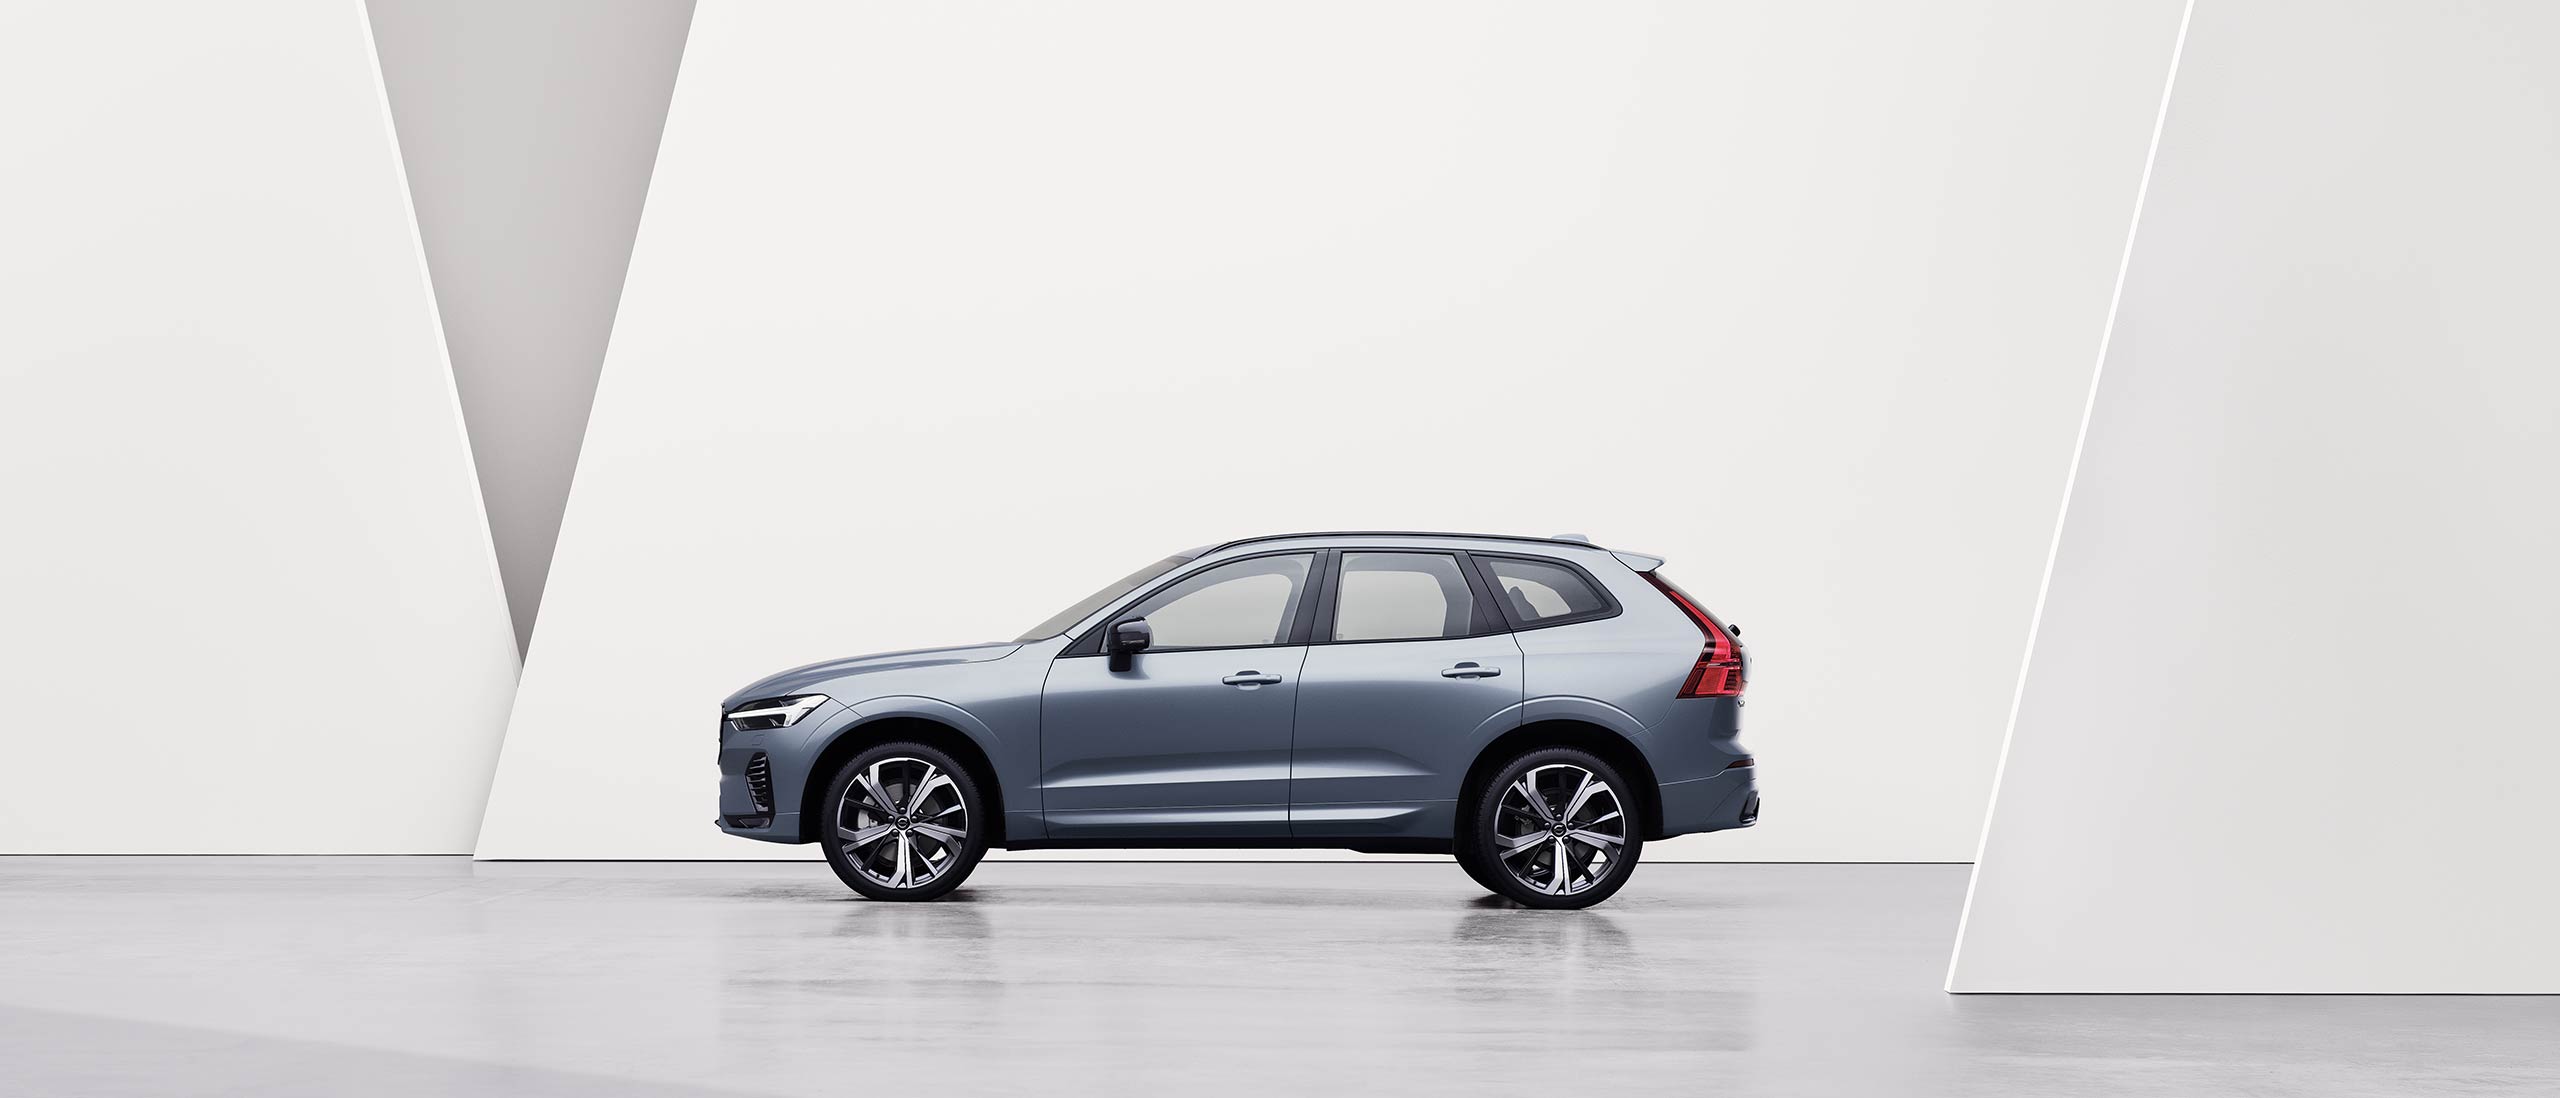 The side profile of a gray Volvo XC60 SUV.